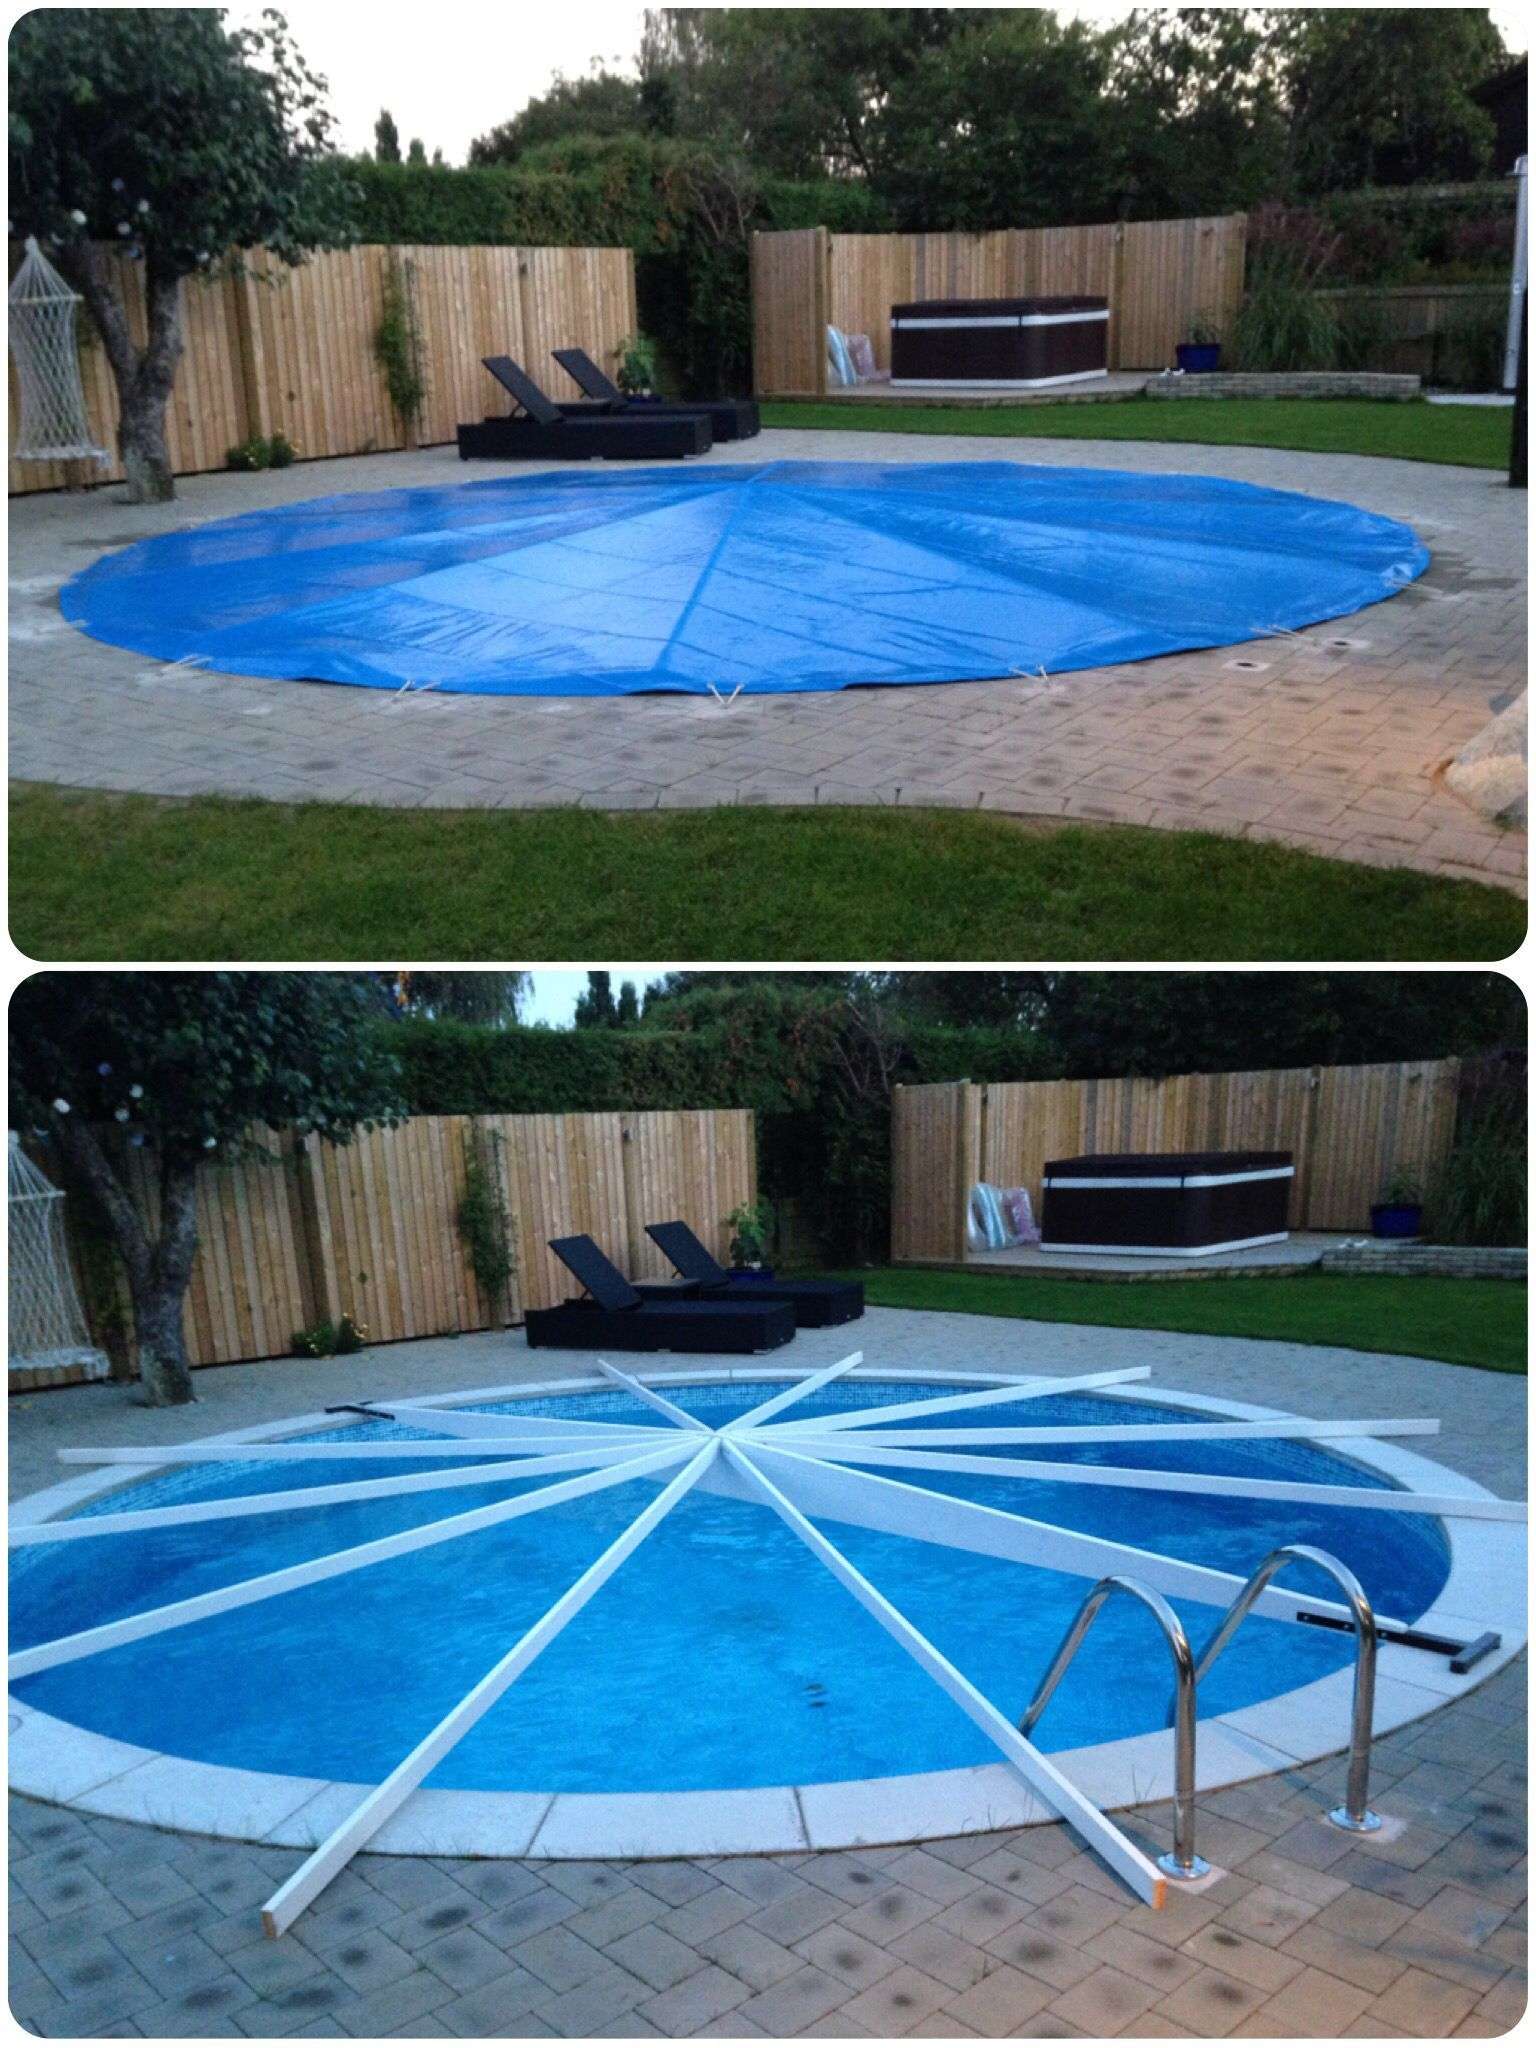 #diy #poolcover to get rid of rain and melting snow, #DIY ...